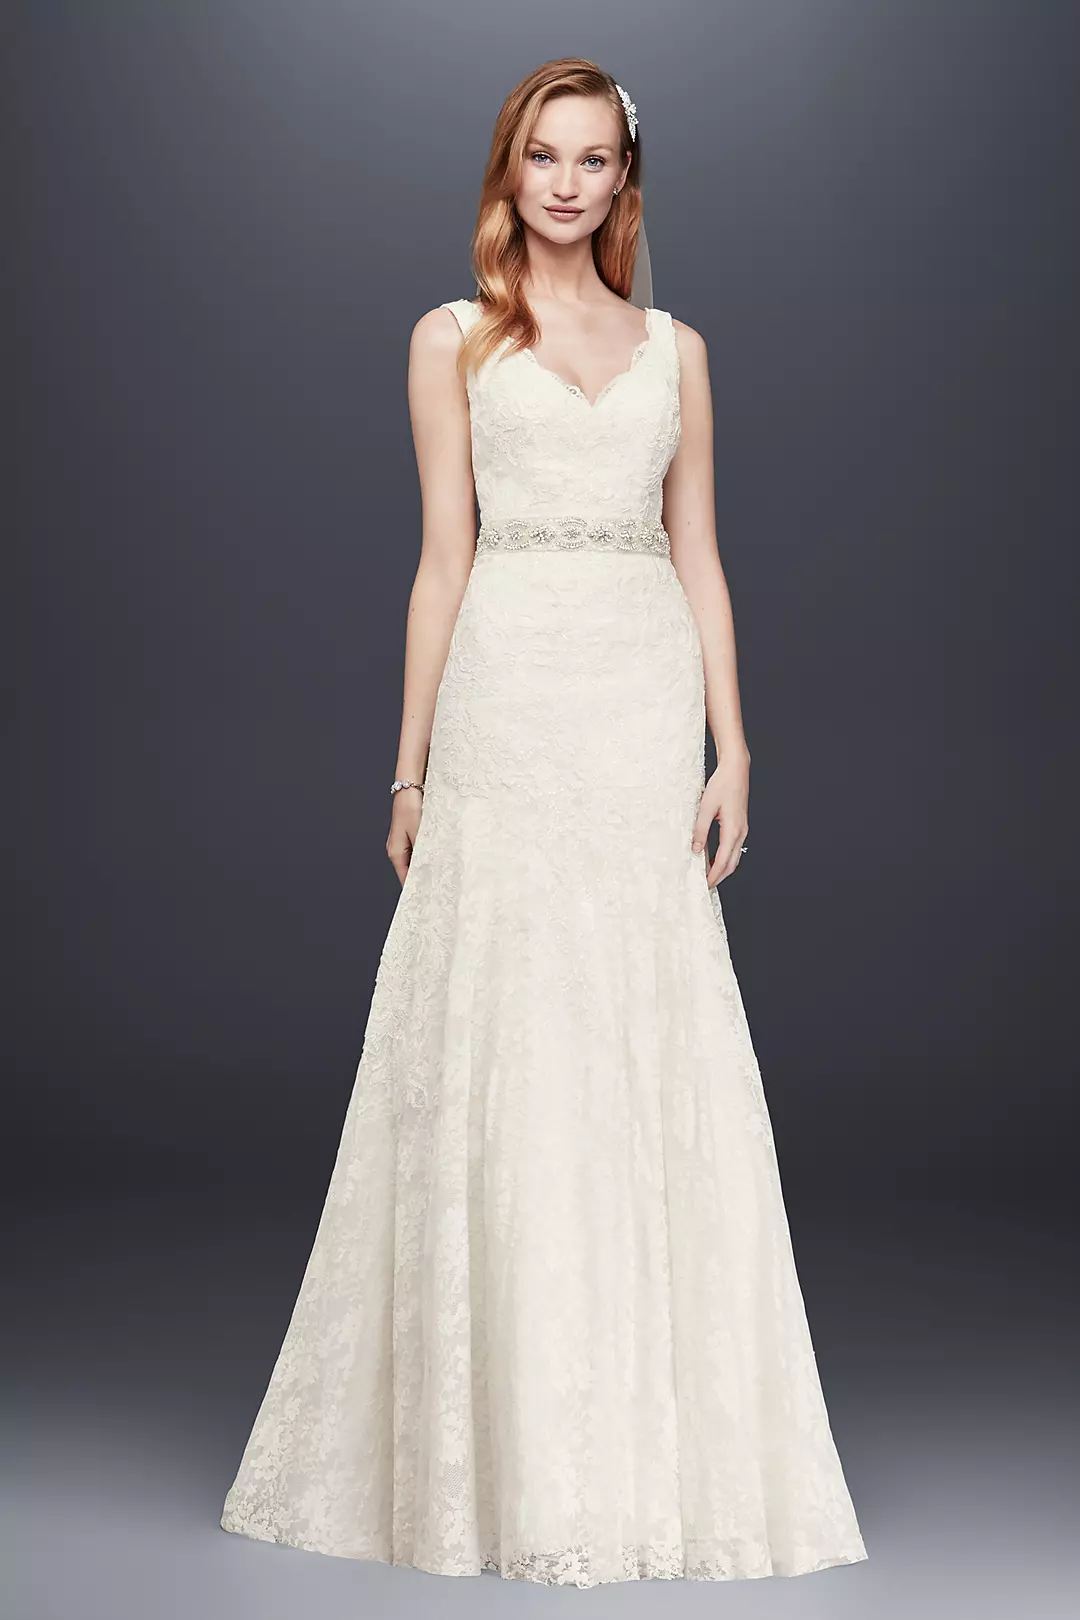 As-Is Lace Scalloped Neck Mermaid Wedding Dress Image